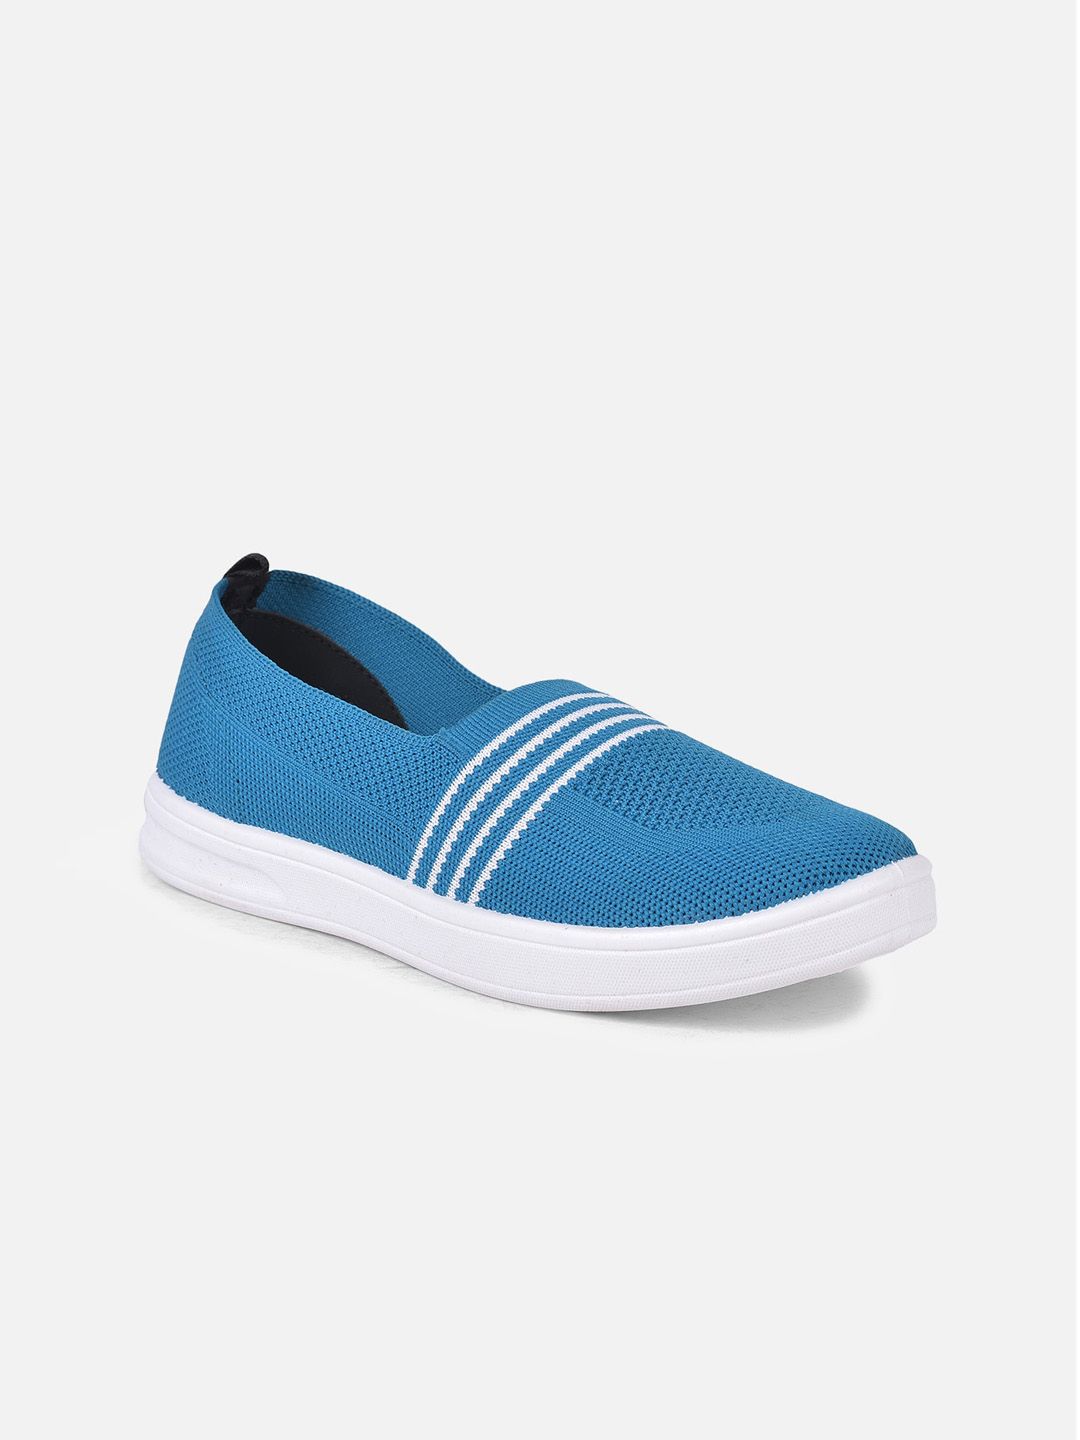 Aqualite Women Blue Woven Design Slip-On Sneakers Price in India